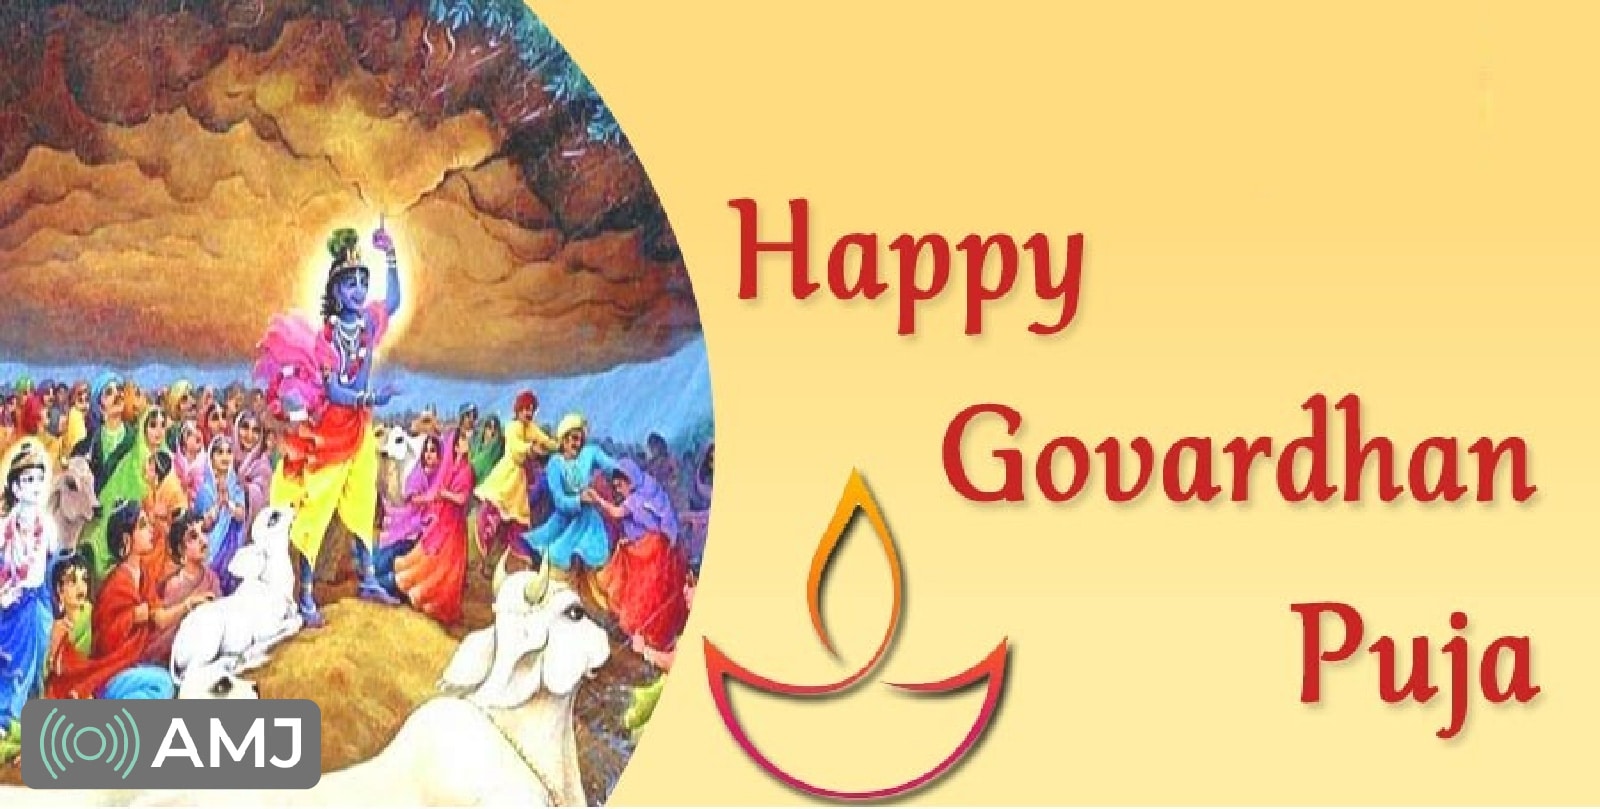 Govardhan Puja Images for Whatsapp